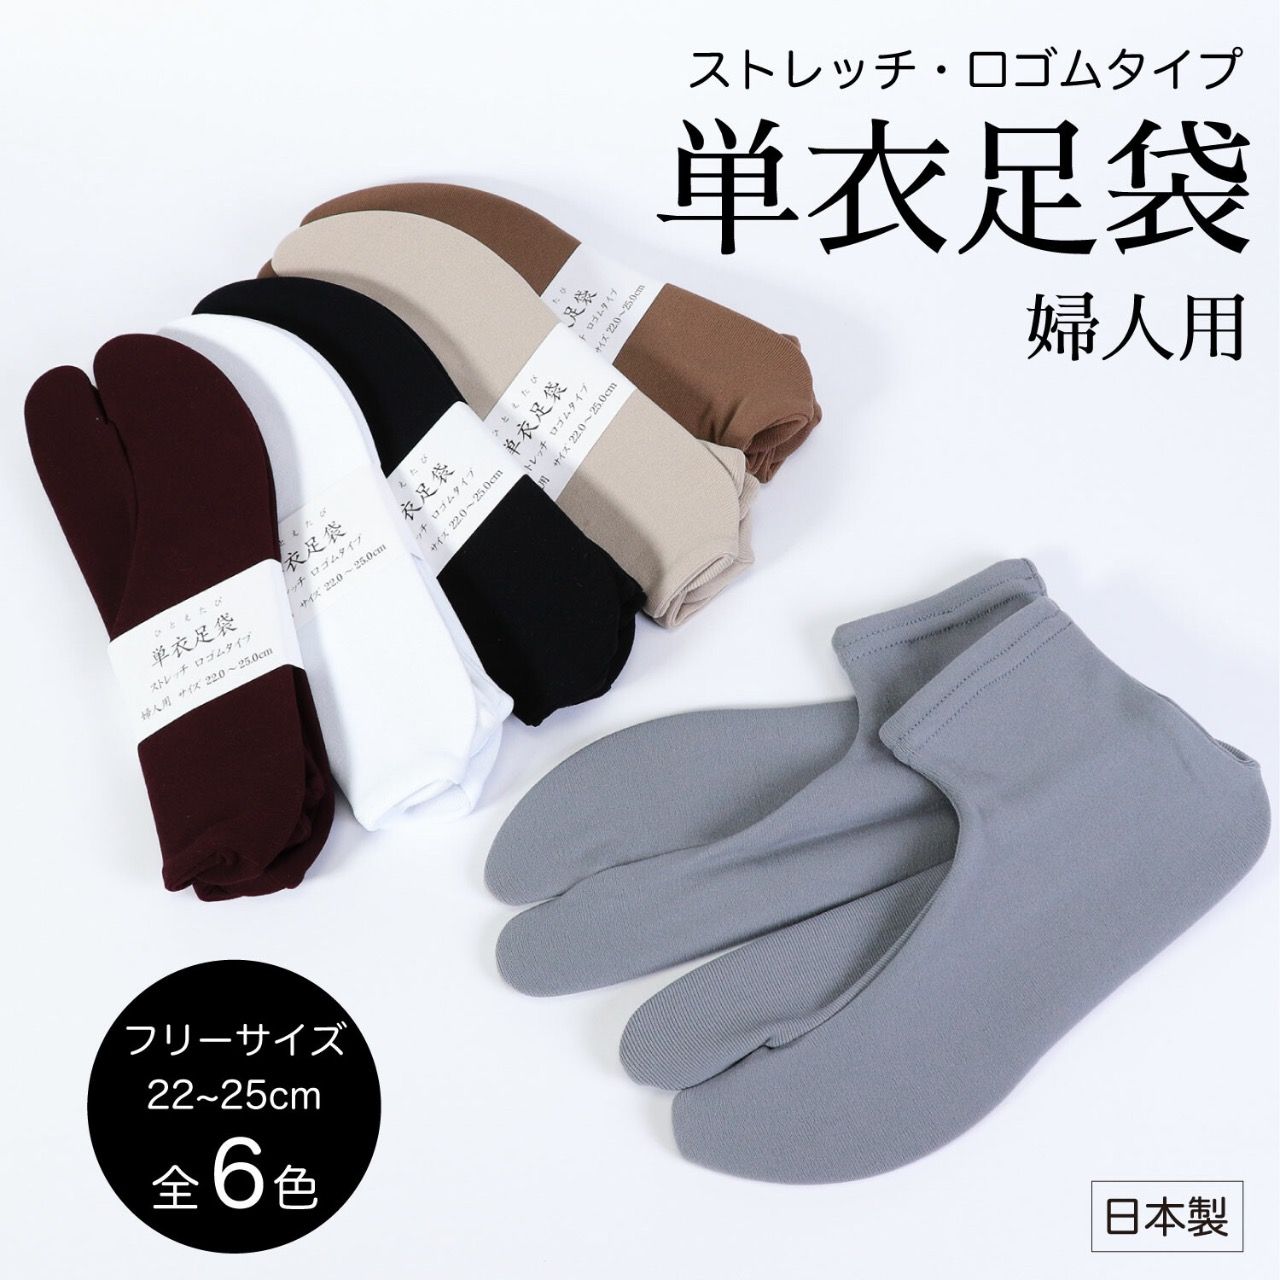 Chaussette Tabi femme - Nylon - 6 couleurs - Made in Japan    